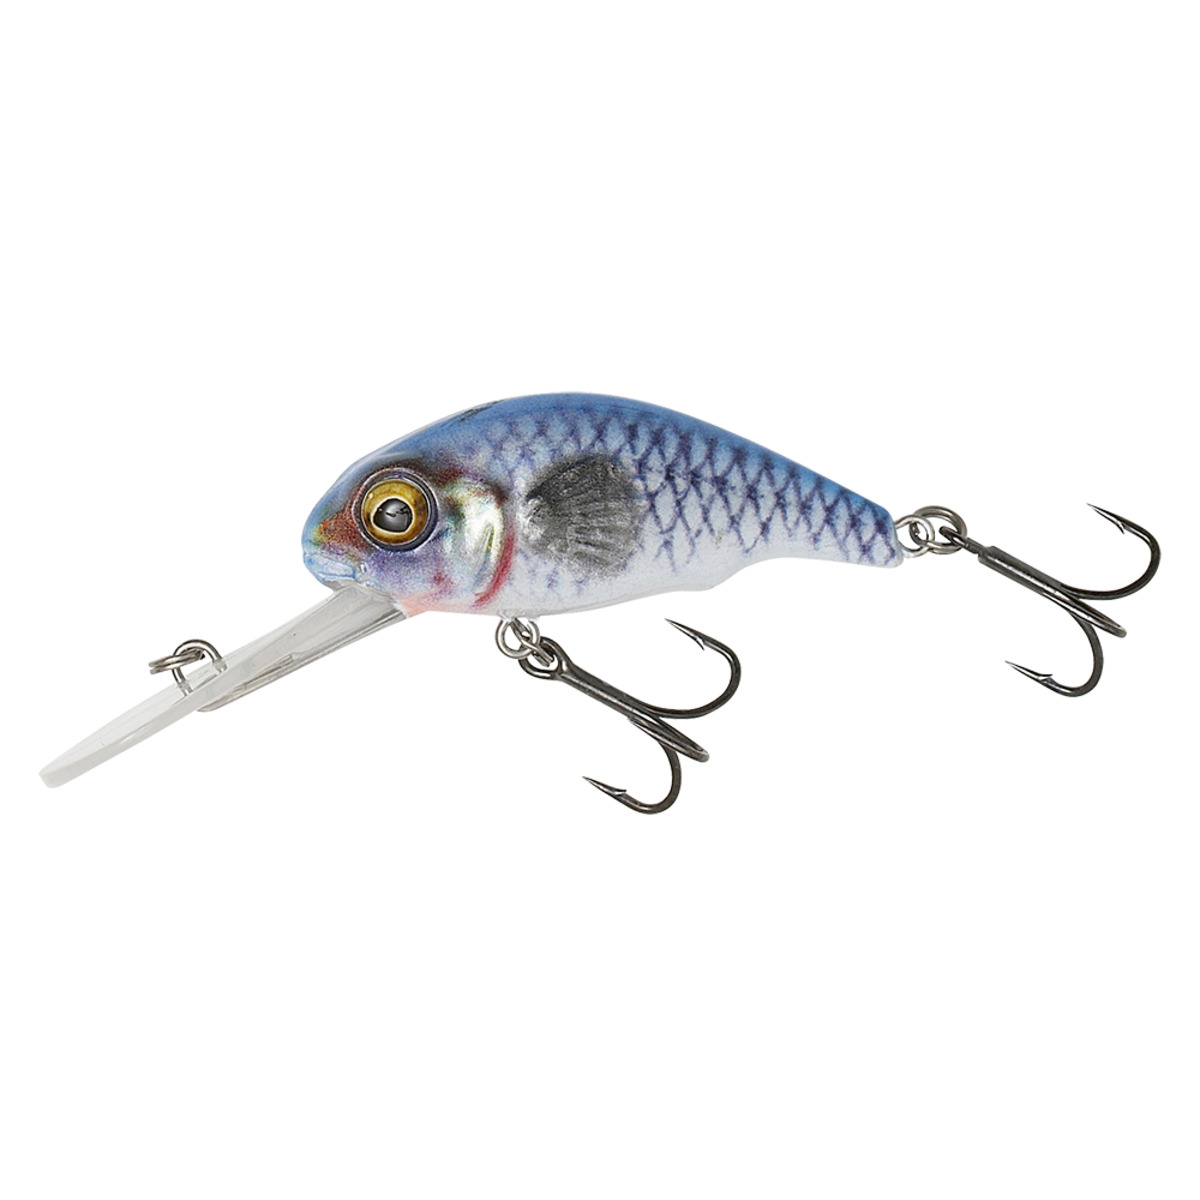 Savage Gear 3d Goby Crank Bait 4cm 3.5g Floating - BLUE/SILVER